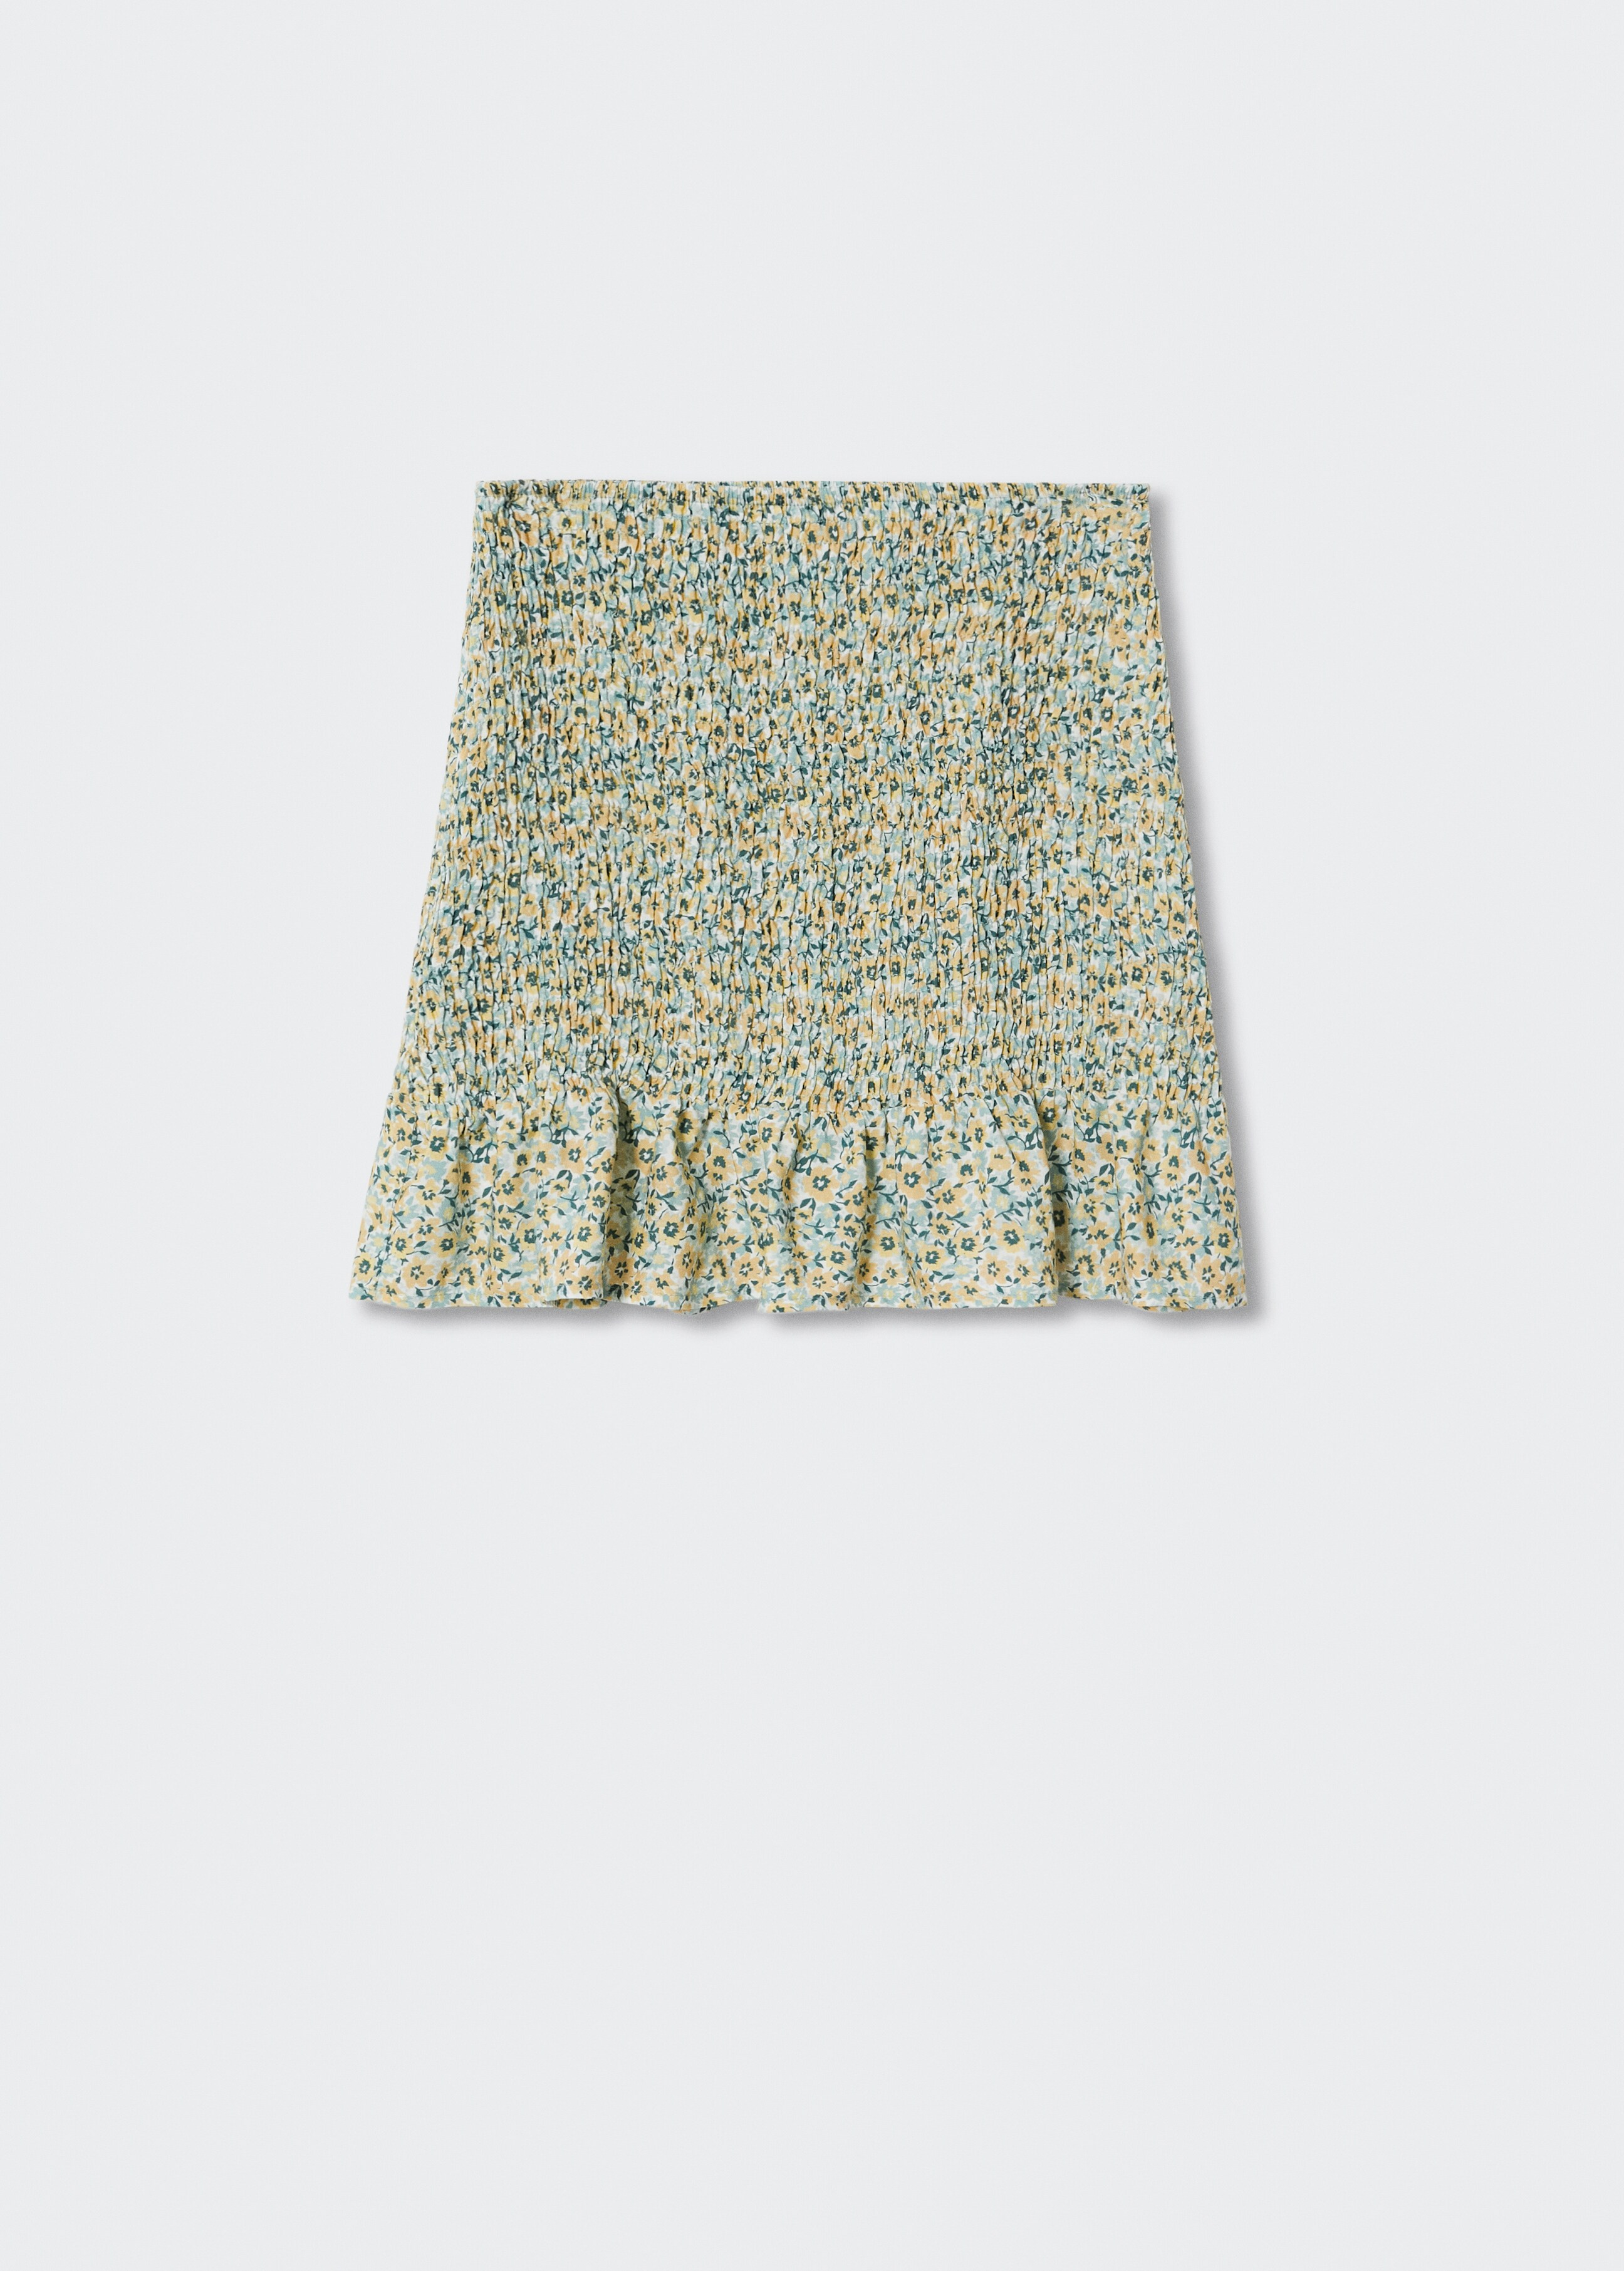 Ruffle flower print skirt - Article without model